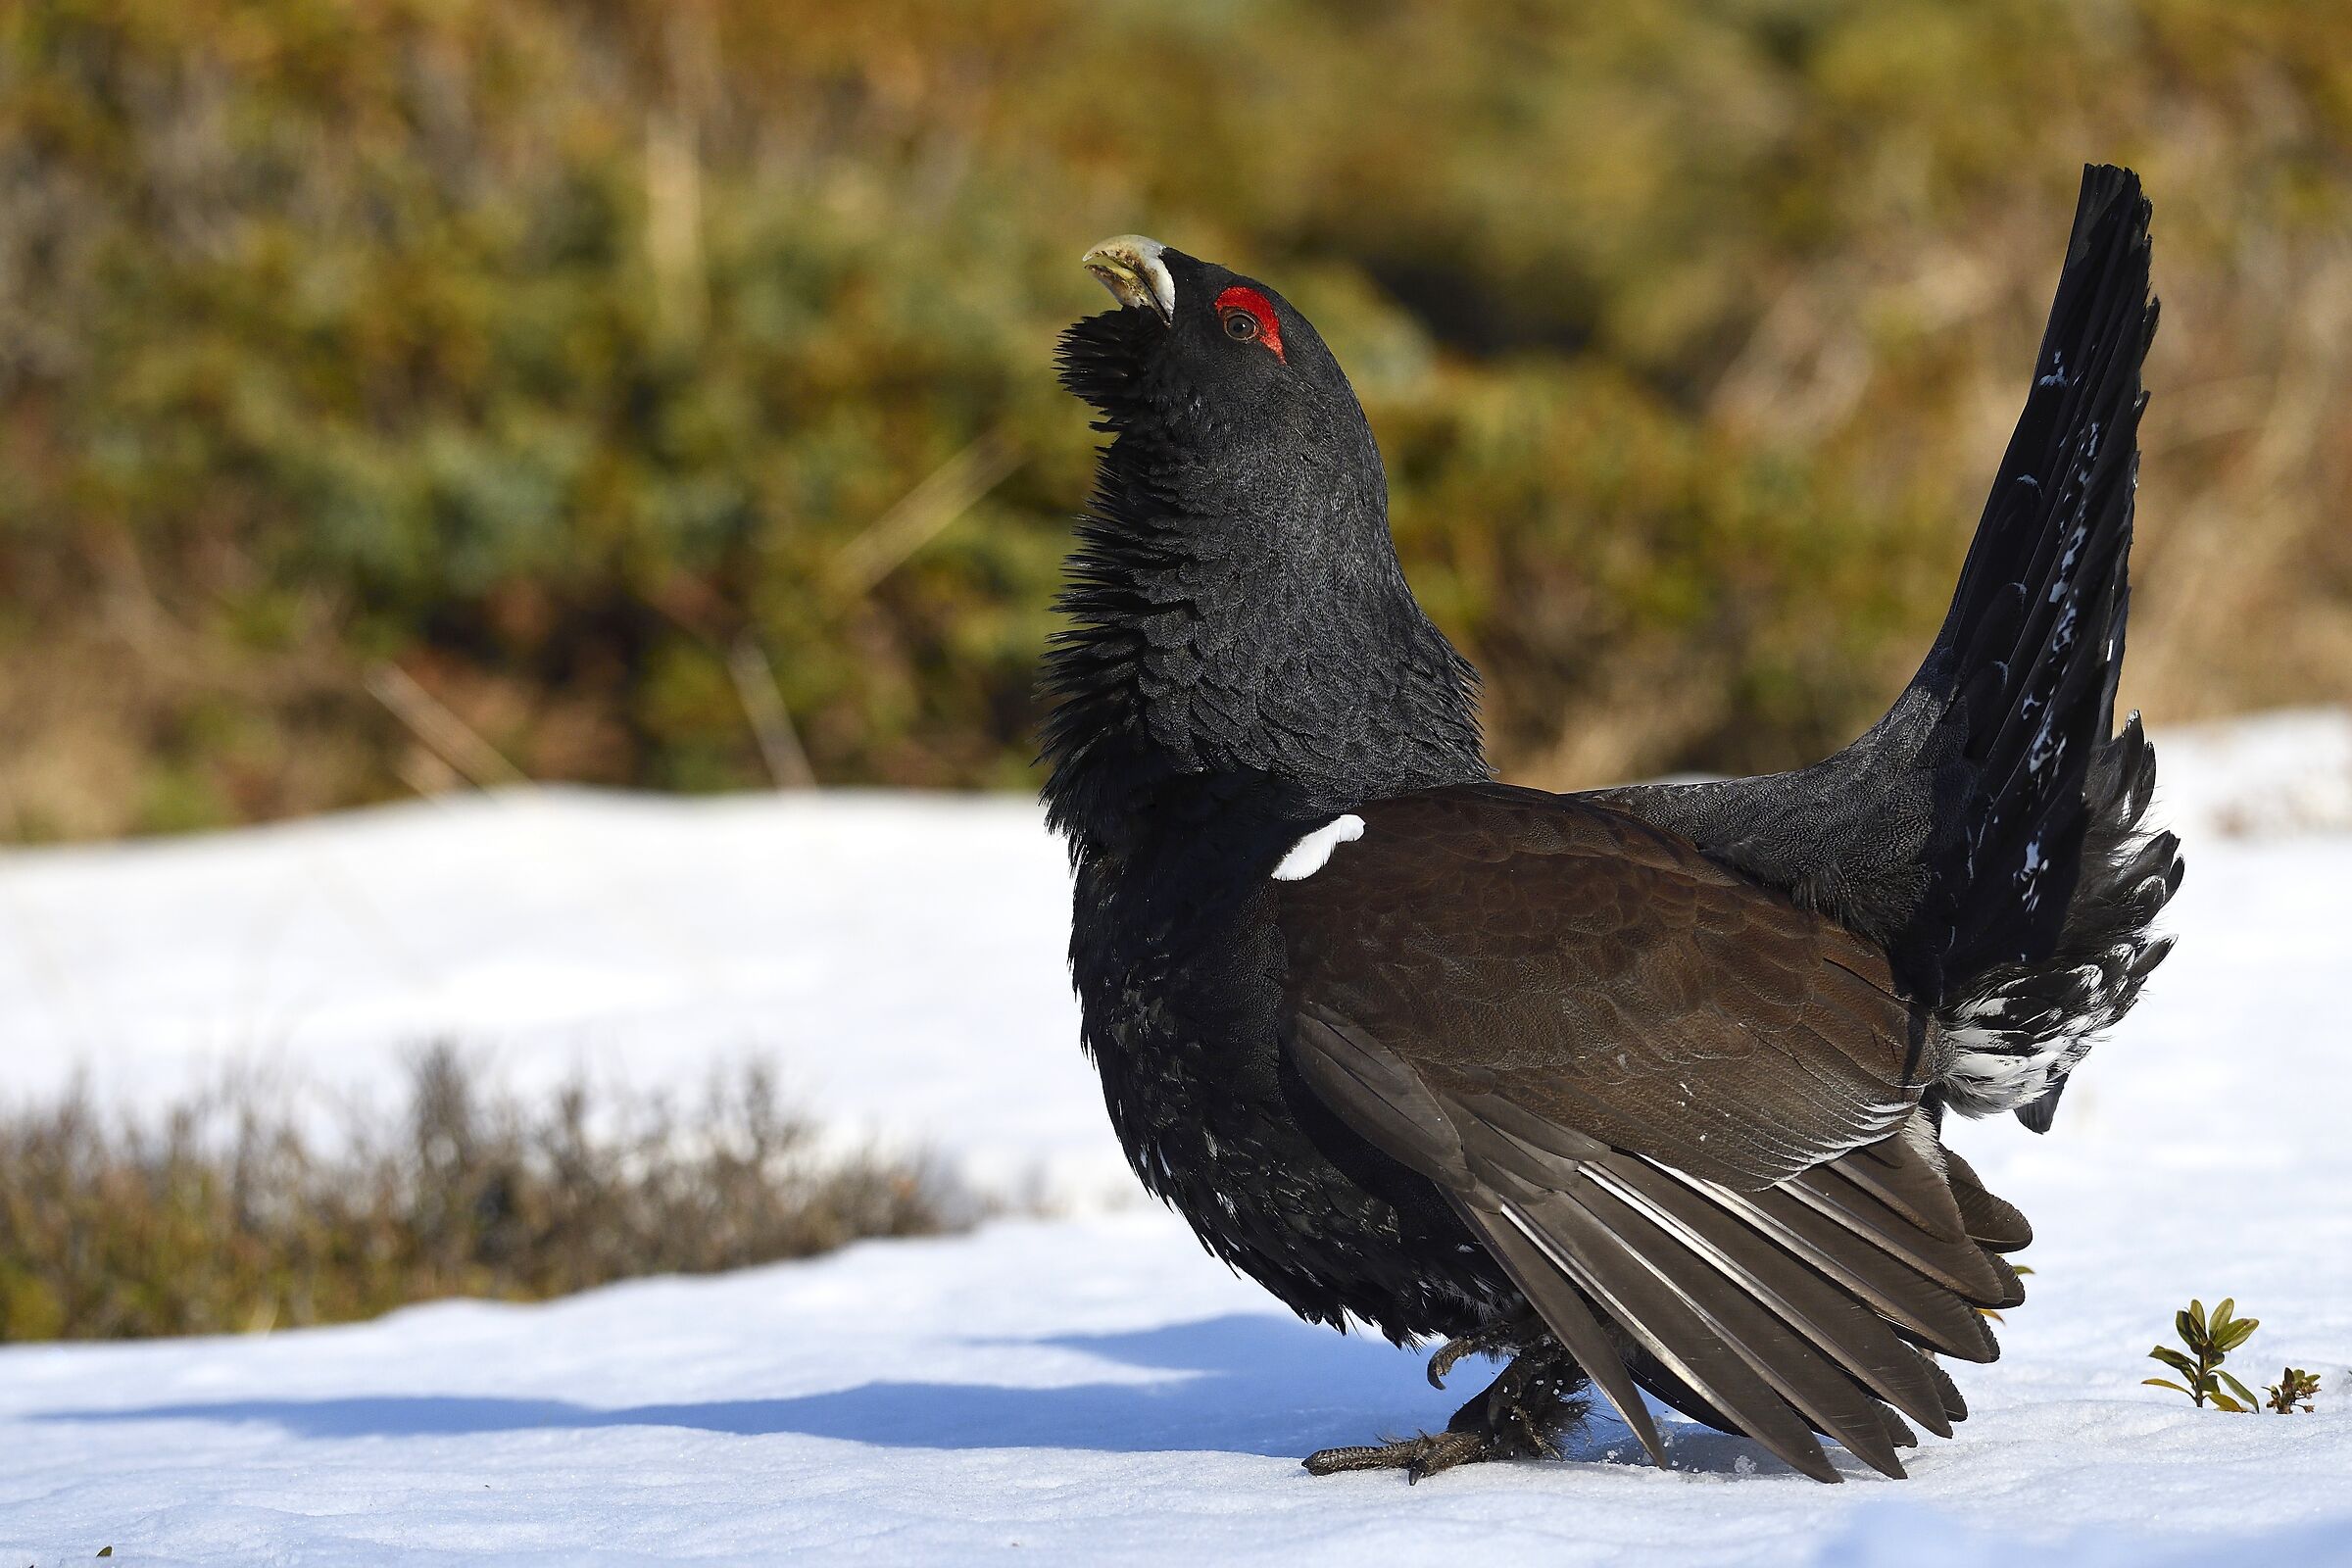 The capercaillie...